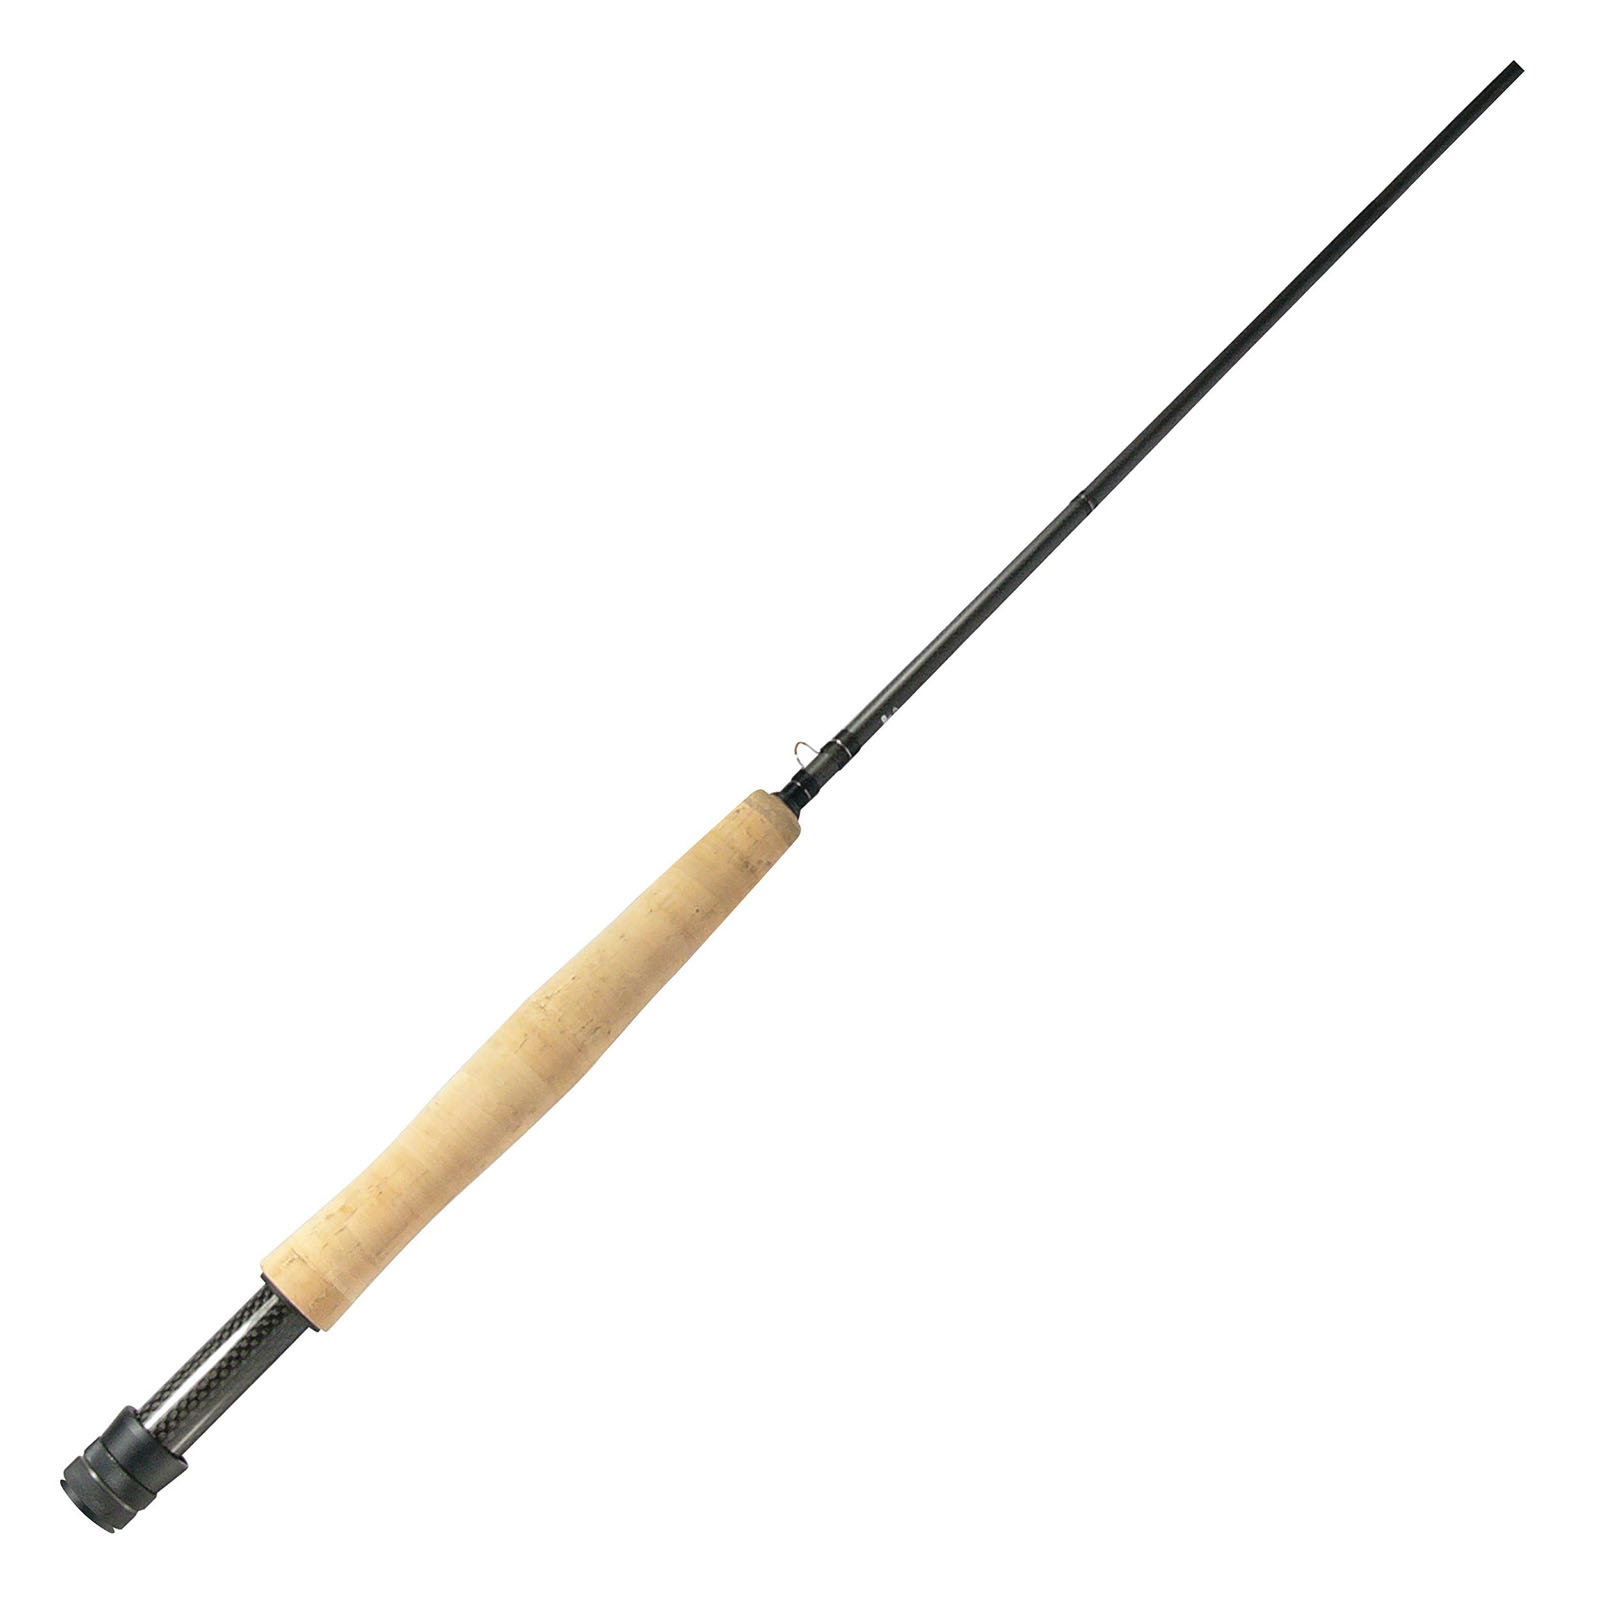 Echo Fly Rods  Silver Bow Fly Shop